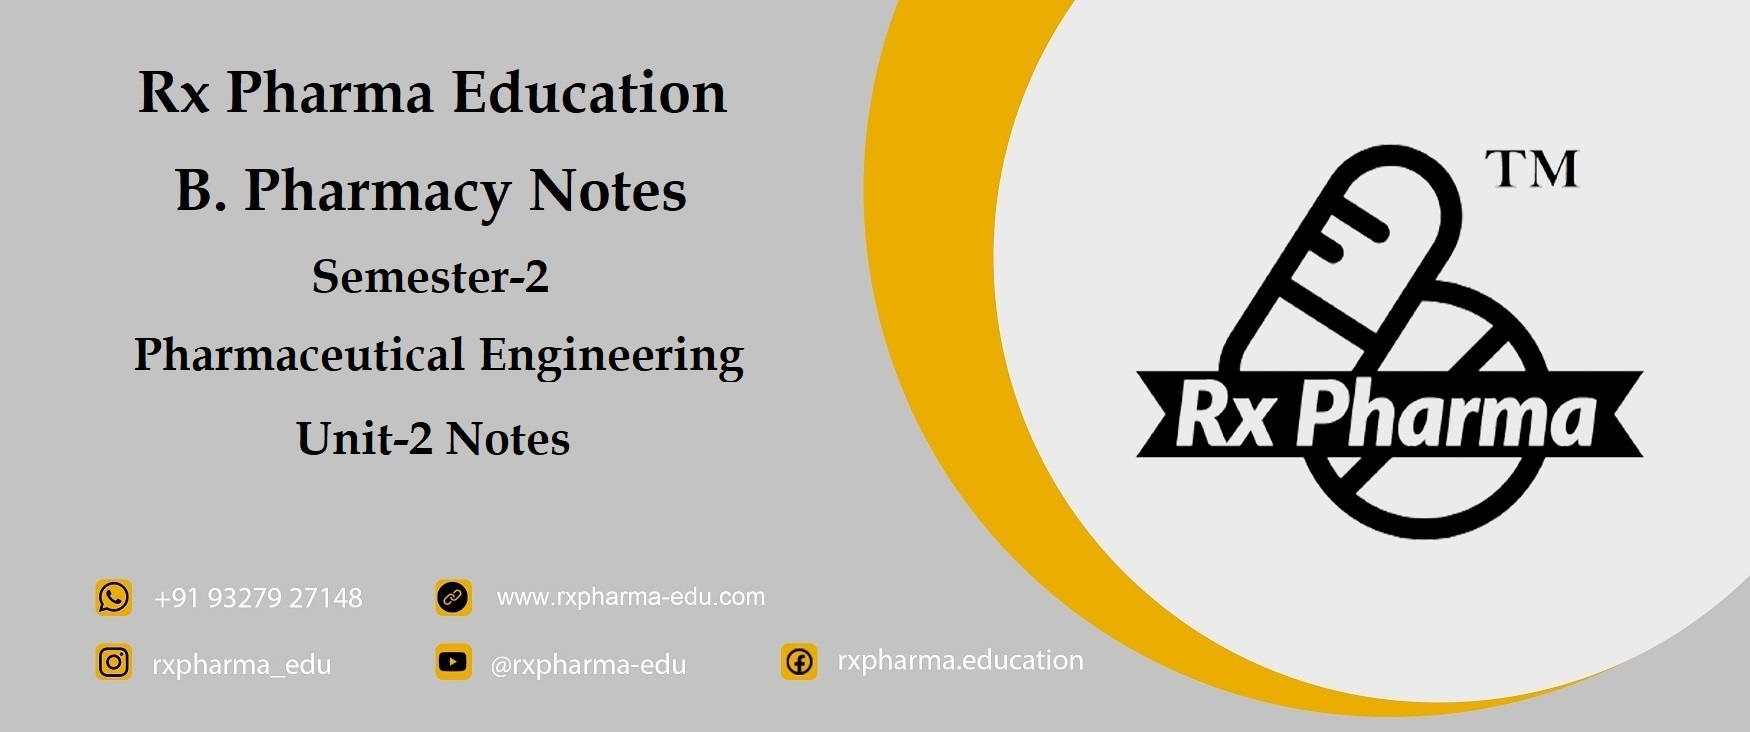 Unit-2 Notes Pharmaceutical Engineering Banner